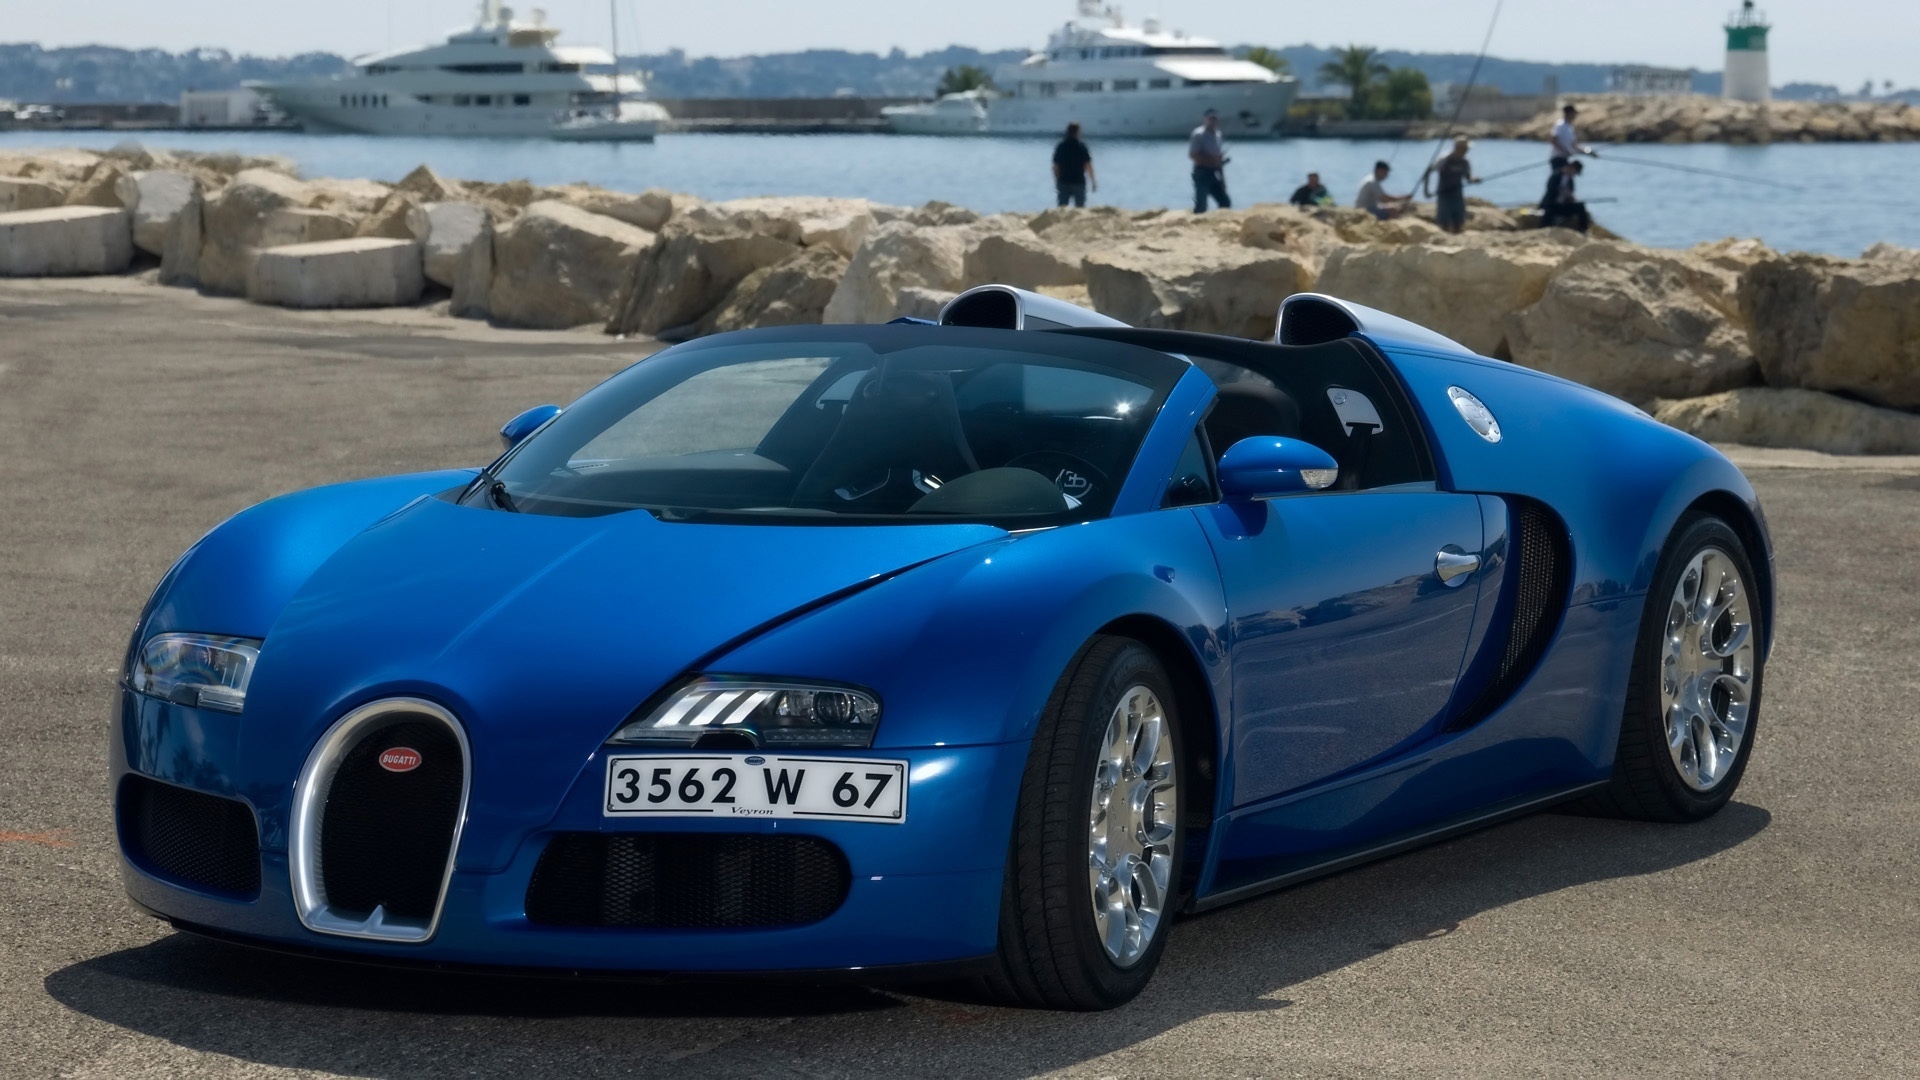 Bugatti Veyron 16.4 Grand Sport in Cannes 2010 - Front And Side 2 for 1920 x 1080 HDTV 1080p resolution